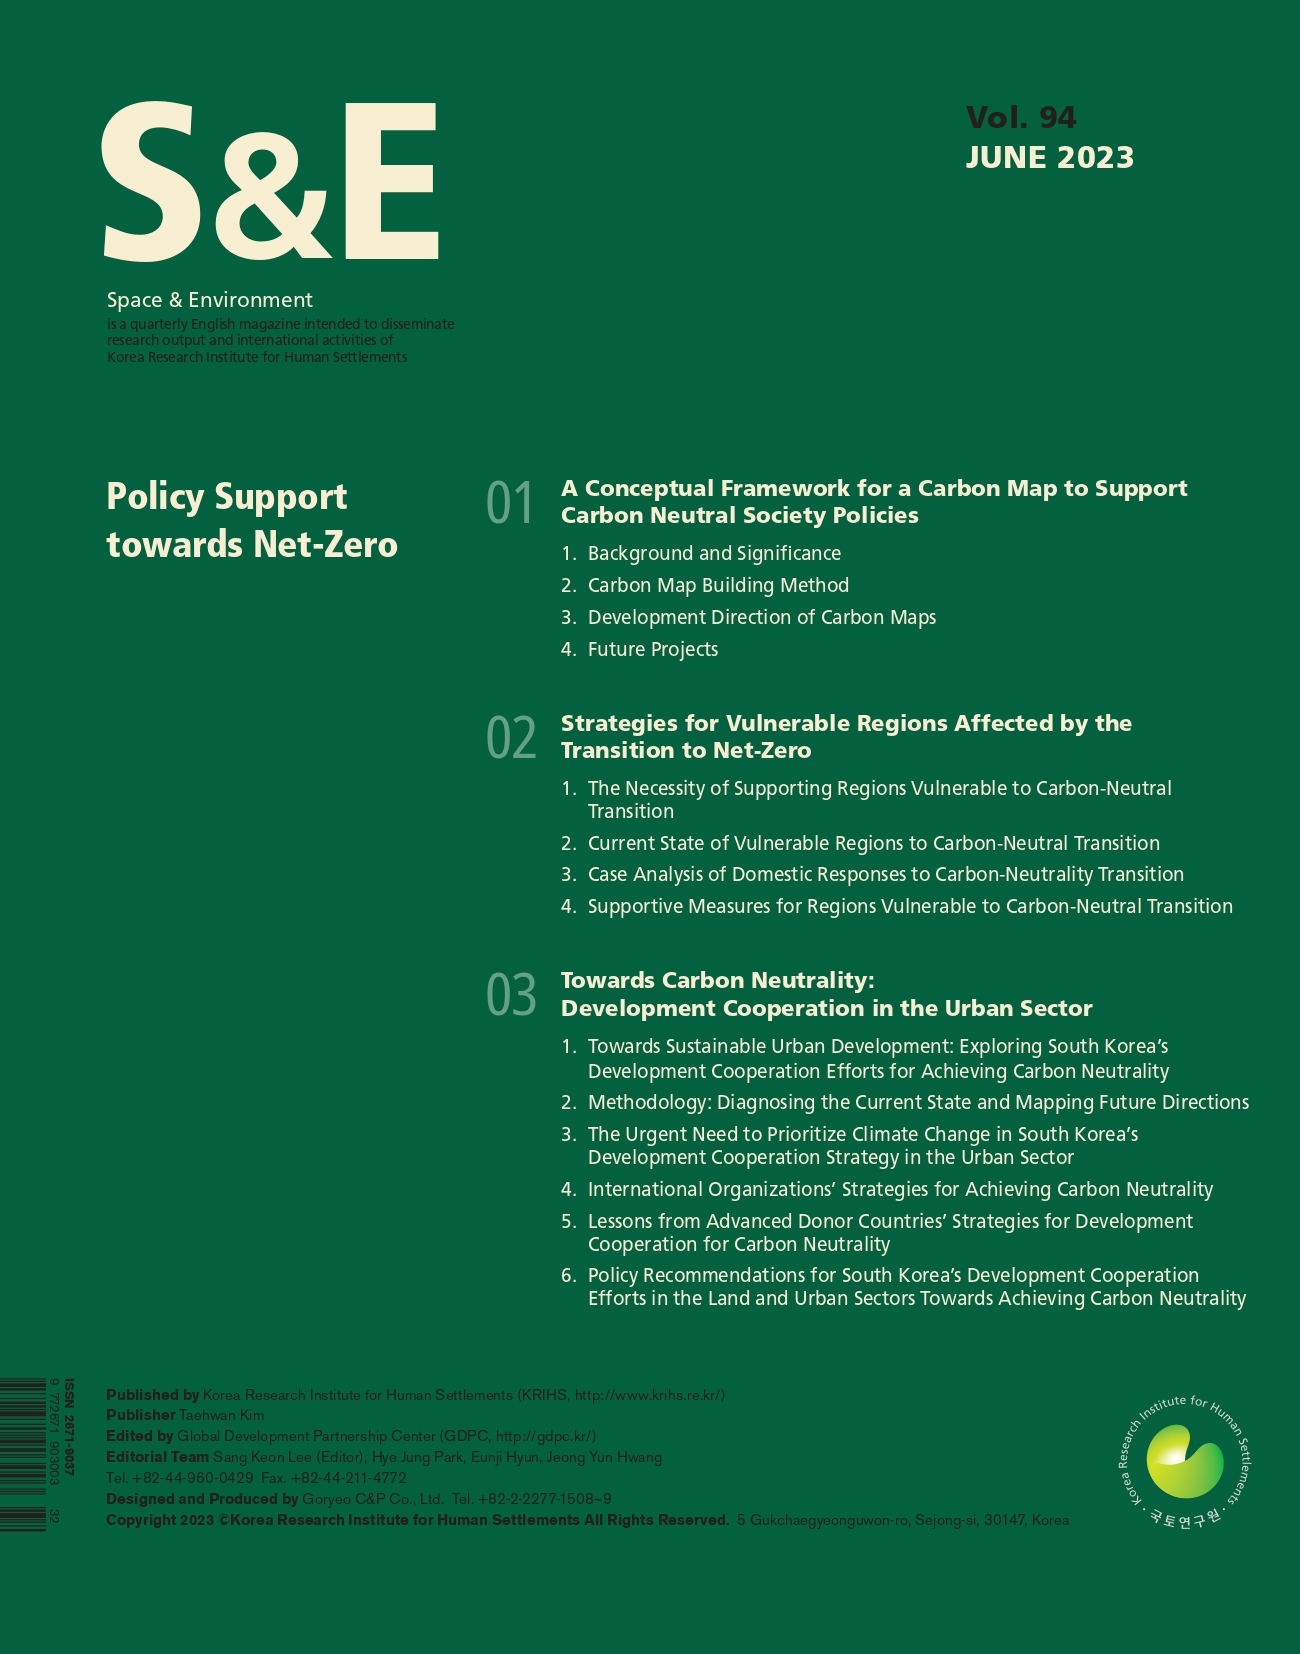 Space & Environment Vol. 94 (June 2023)
Policy Support towards Net-Zero